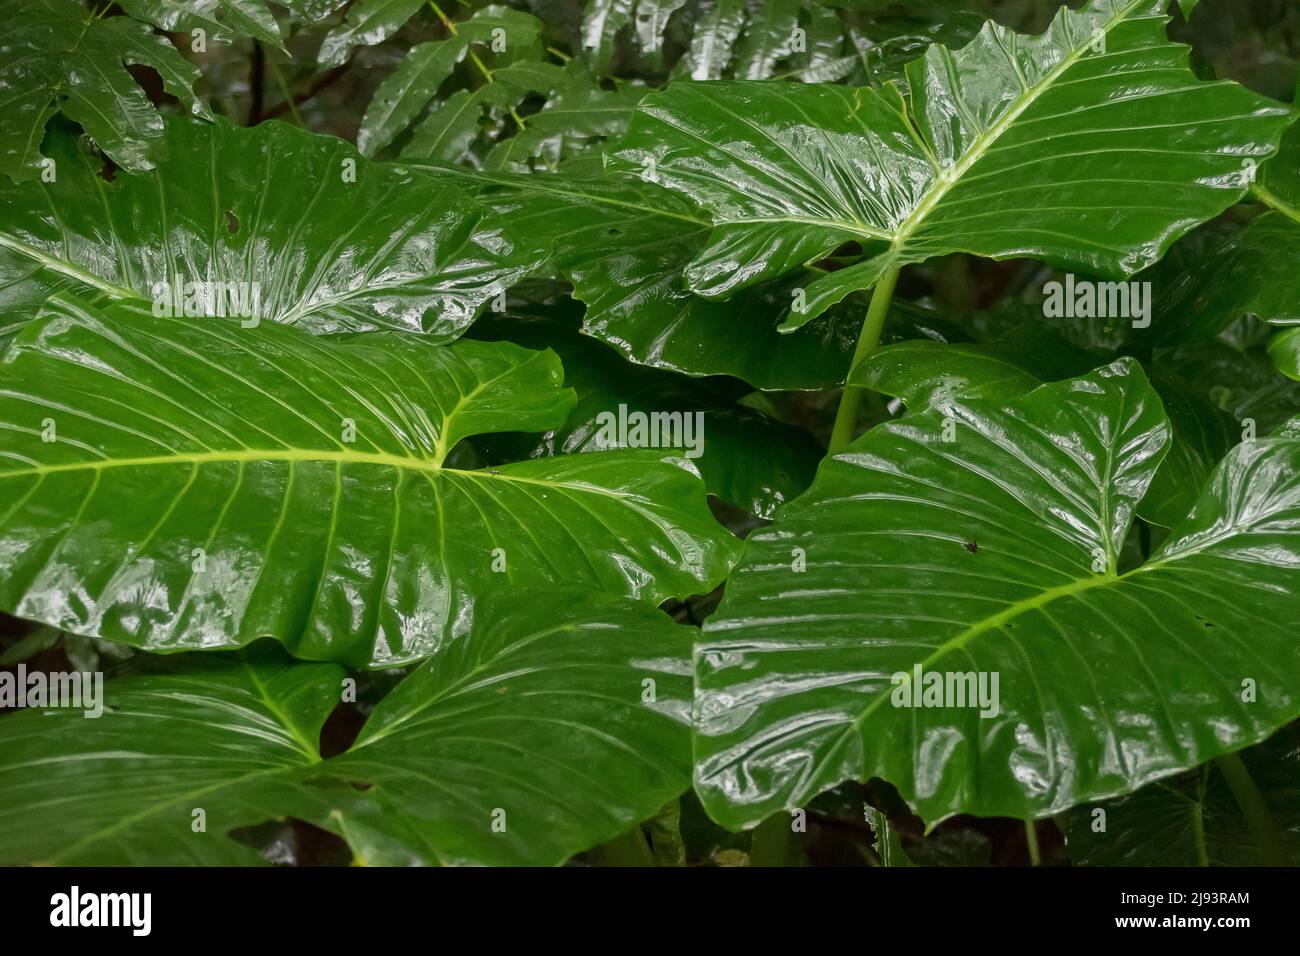 Large. wet, green leaves of Cunjevoi, (native lily)  alocasia brisbanensis,   growing in lowland subtropical rainforest, Queensland, Australia. Stock Photo